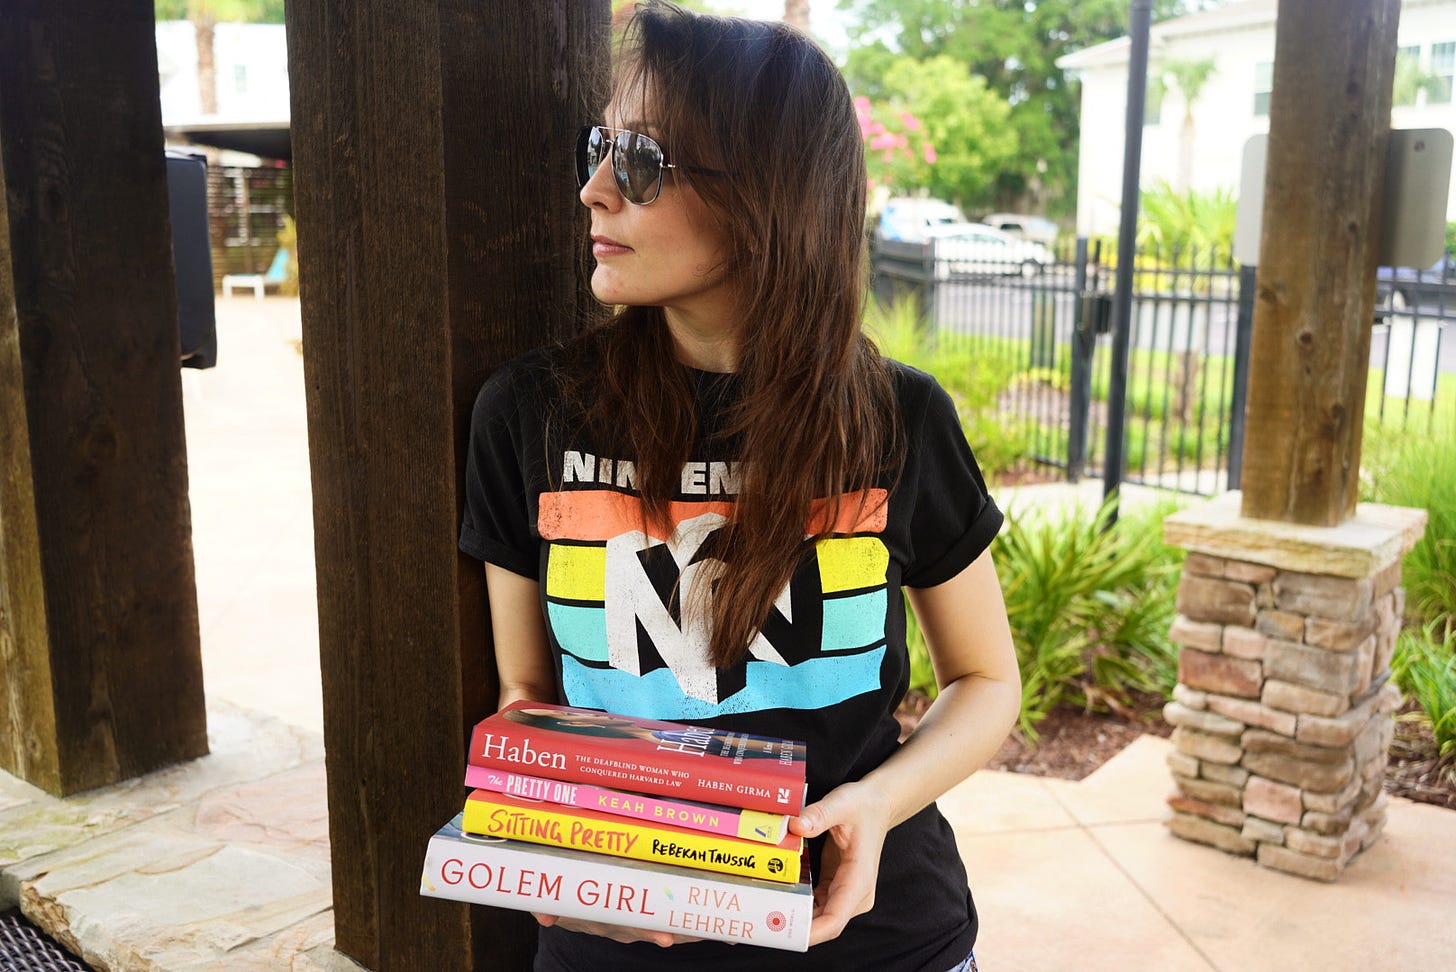 a photo of Kendra, a 30-something white woman wearing sunglasses and black Nintendo t-shirt, holding a stack of books, including The Pretty One, Golem Girl, Haben, and Sitting Pretty.